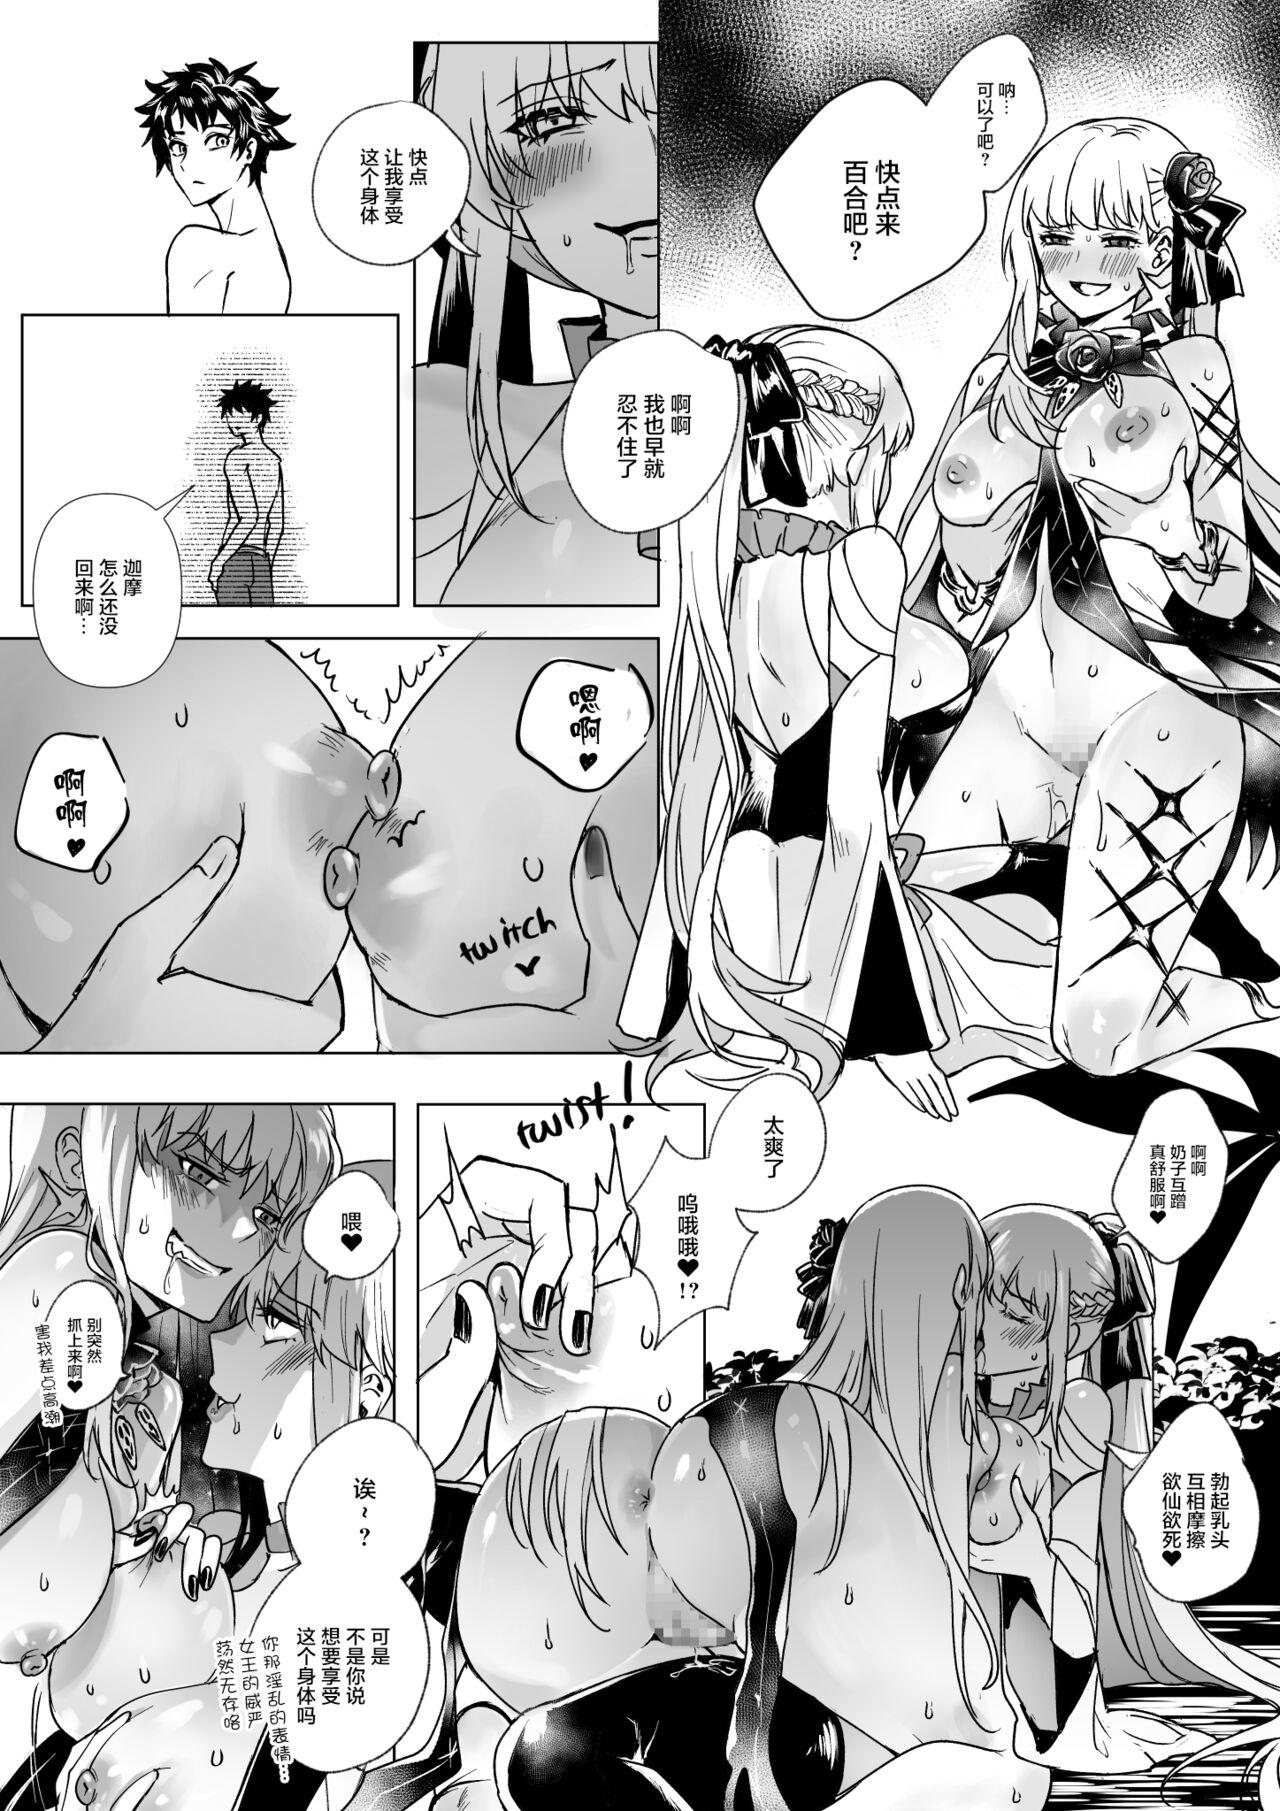 Japan FGO モルガン&水着カーマ憑依 - Fate grand order Hot Girl Pussy - Page 11